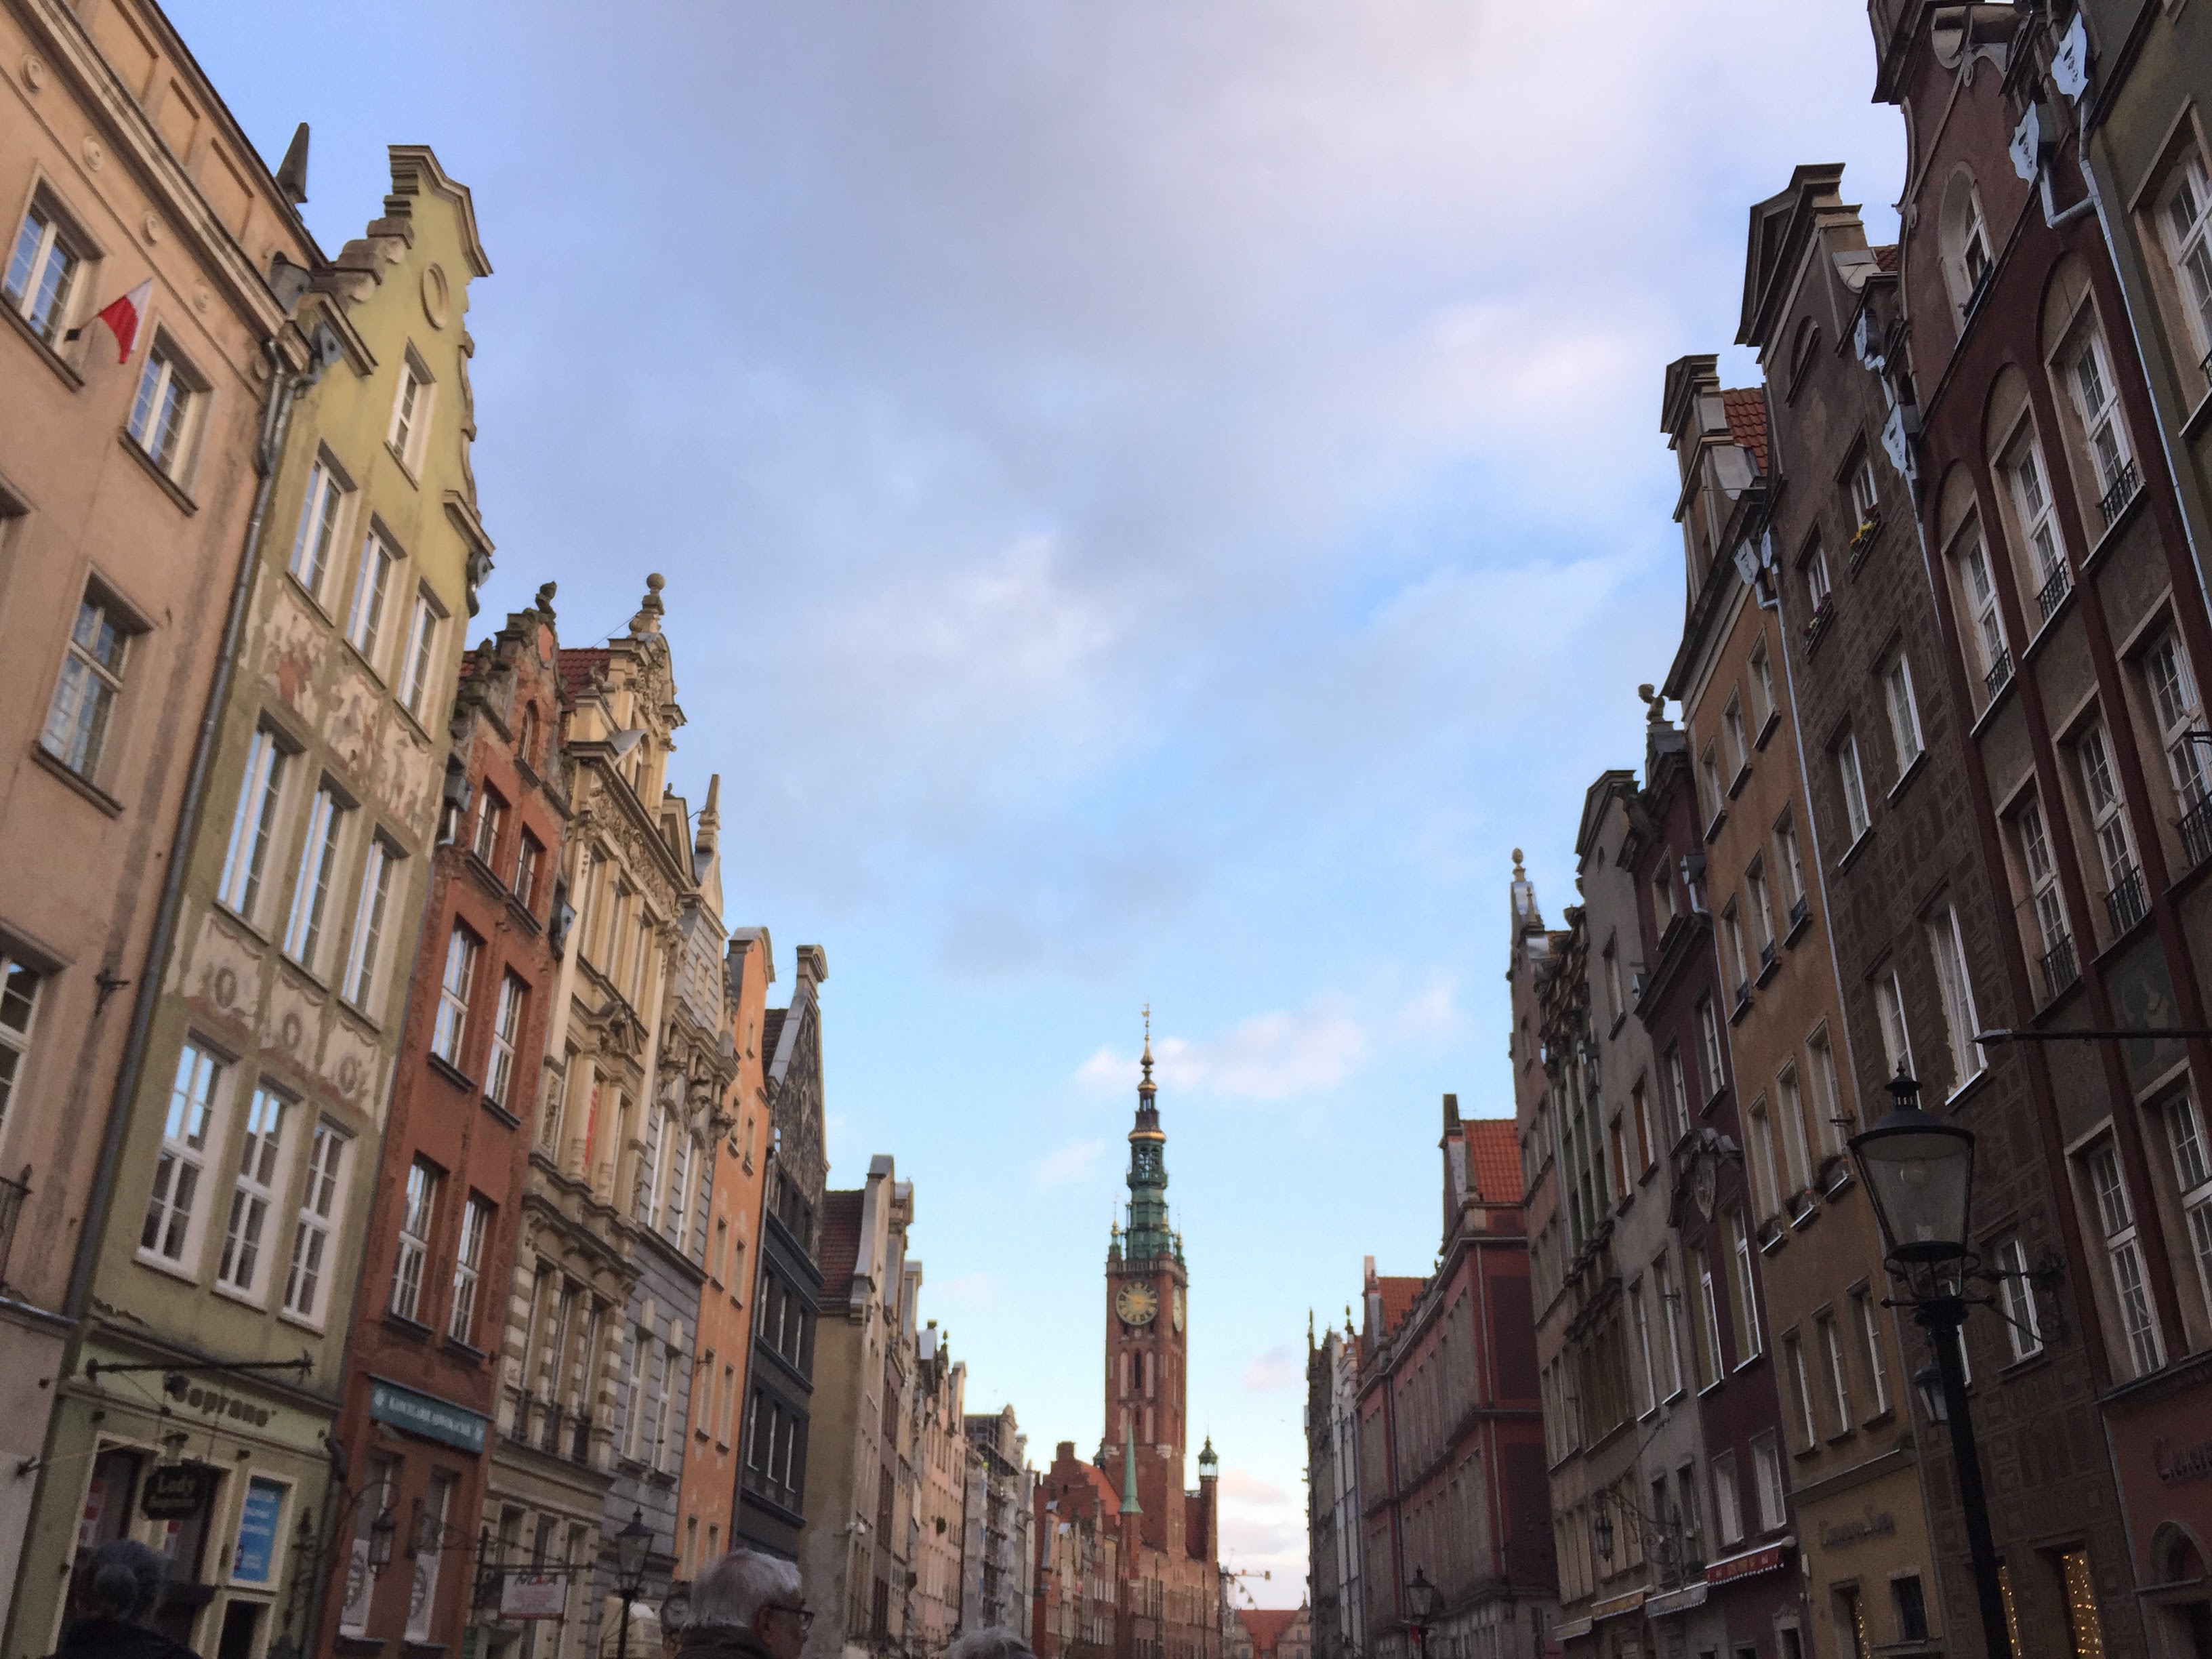 The Old Town of Gdańsk